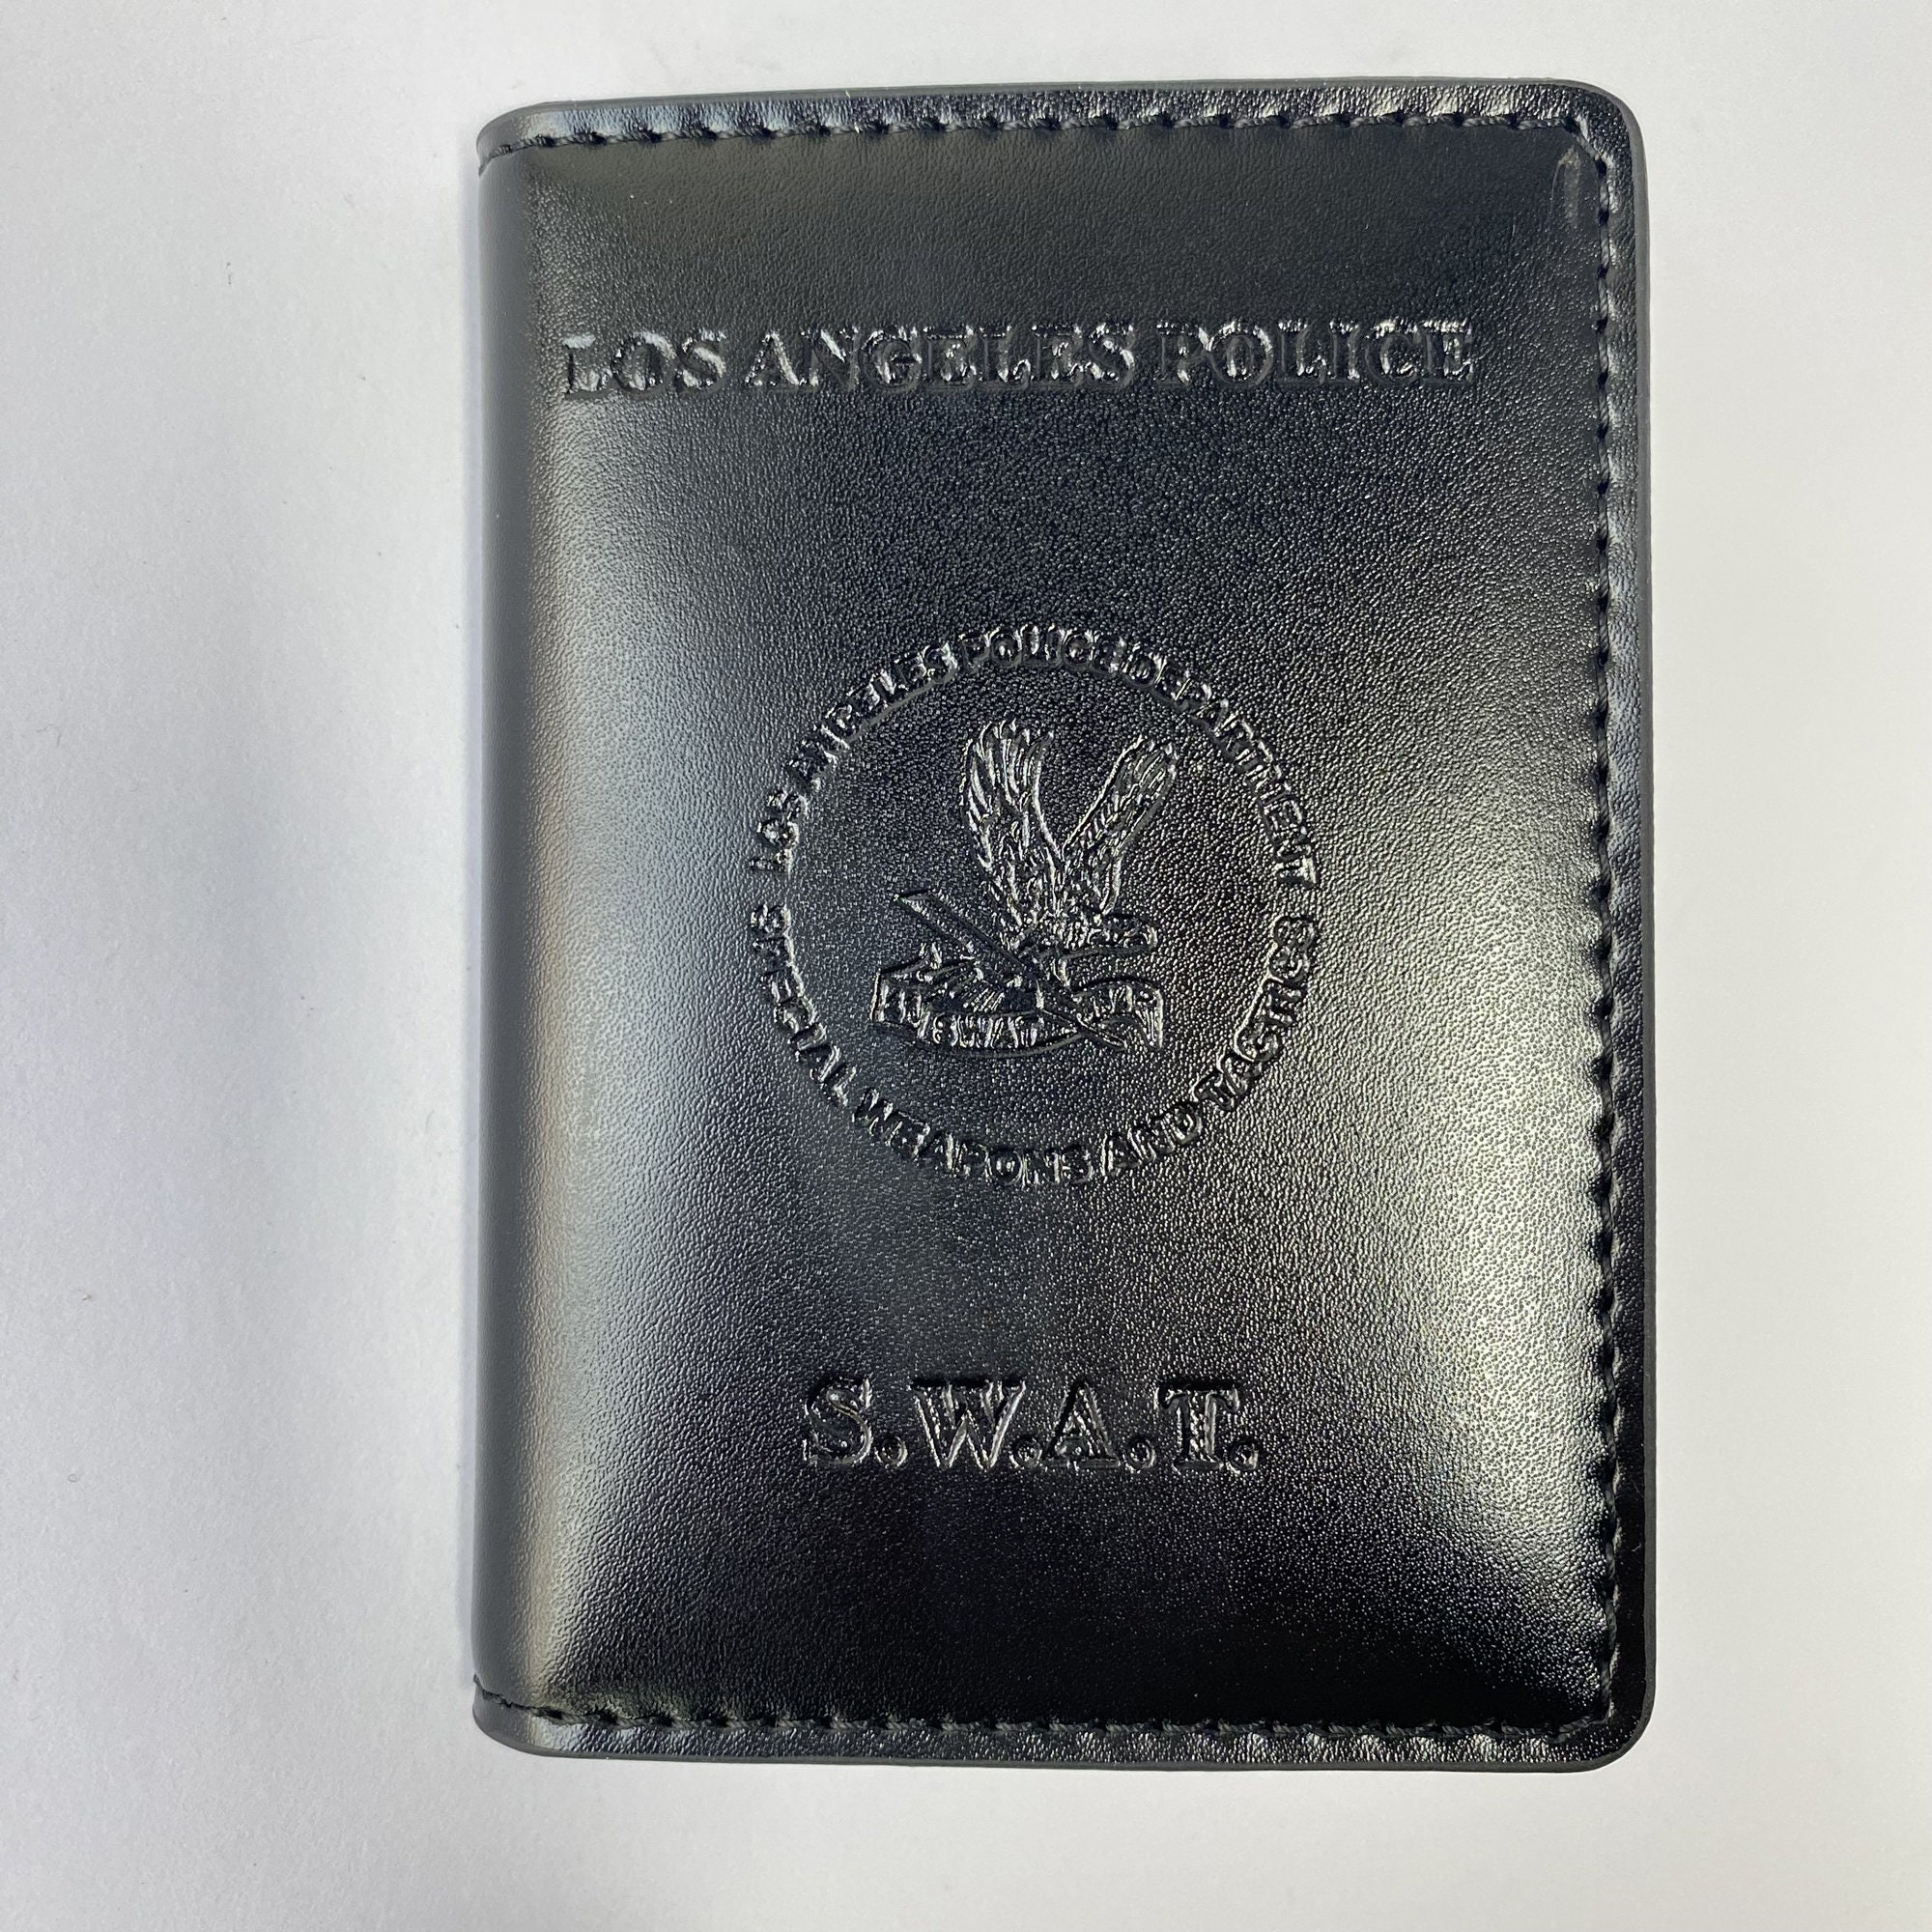 Genuine Leather Oval Inset Type Holder/ Holster/ Wallet For LAPD